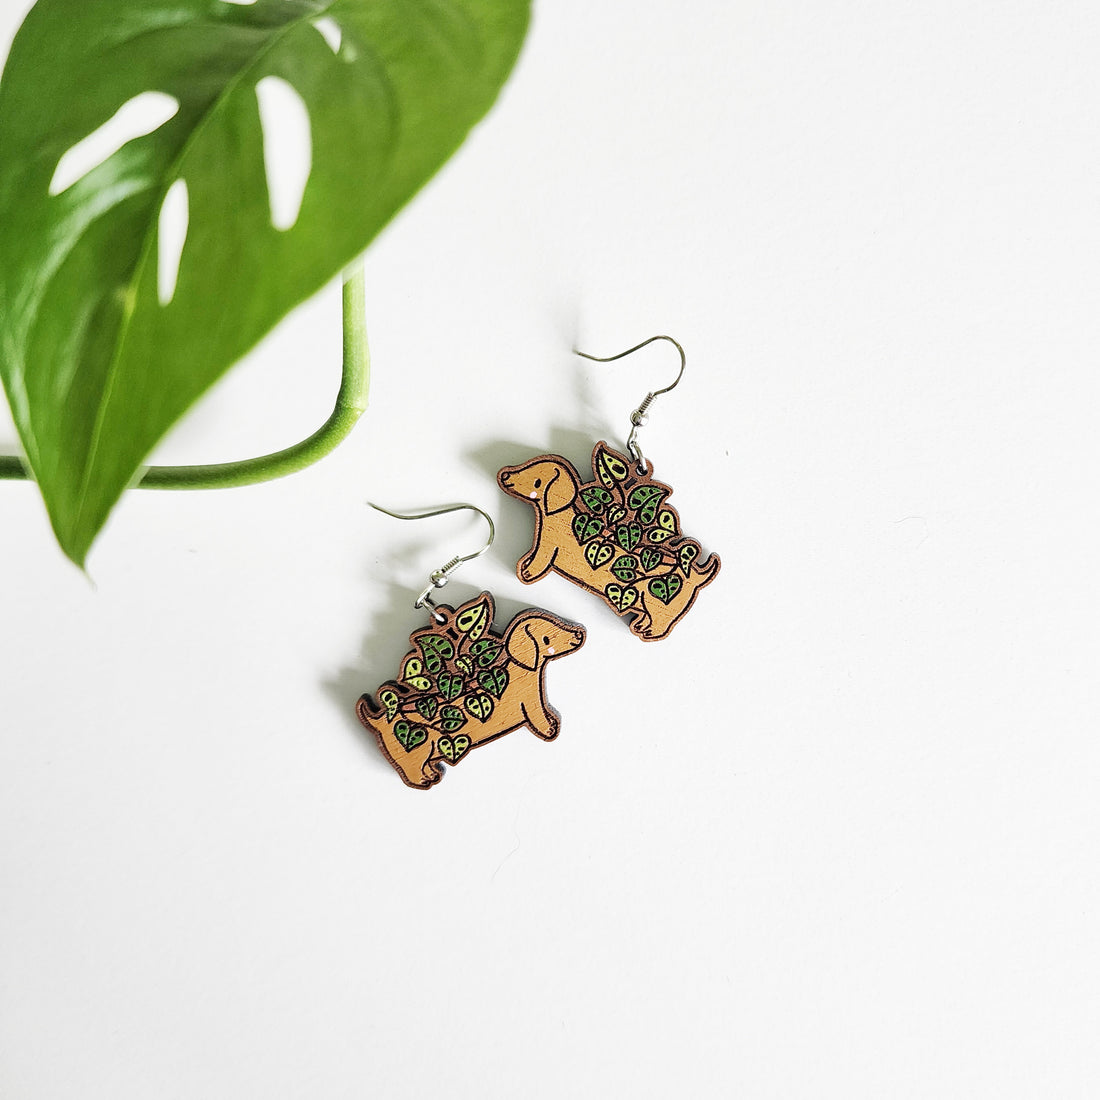 dachshund planter earrings on a white background with a green leaf